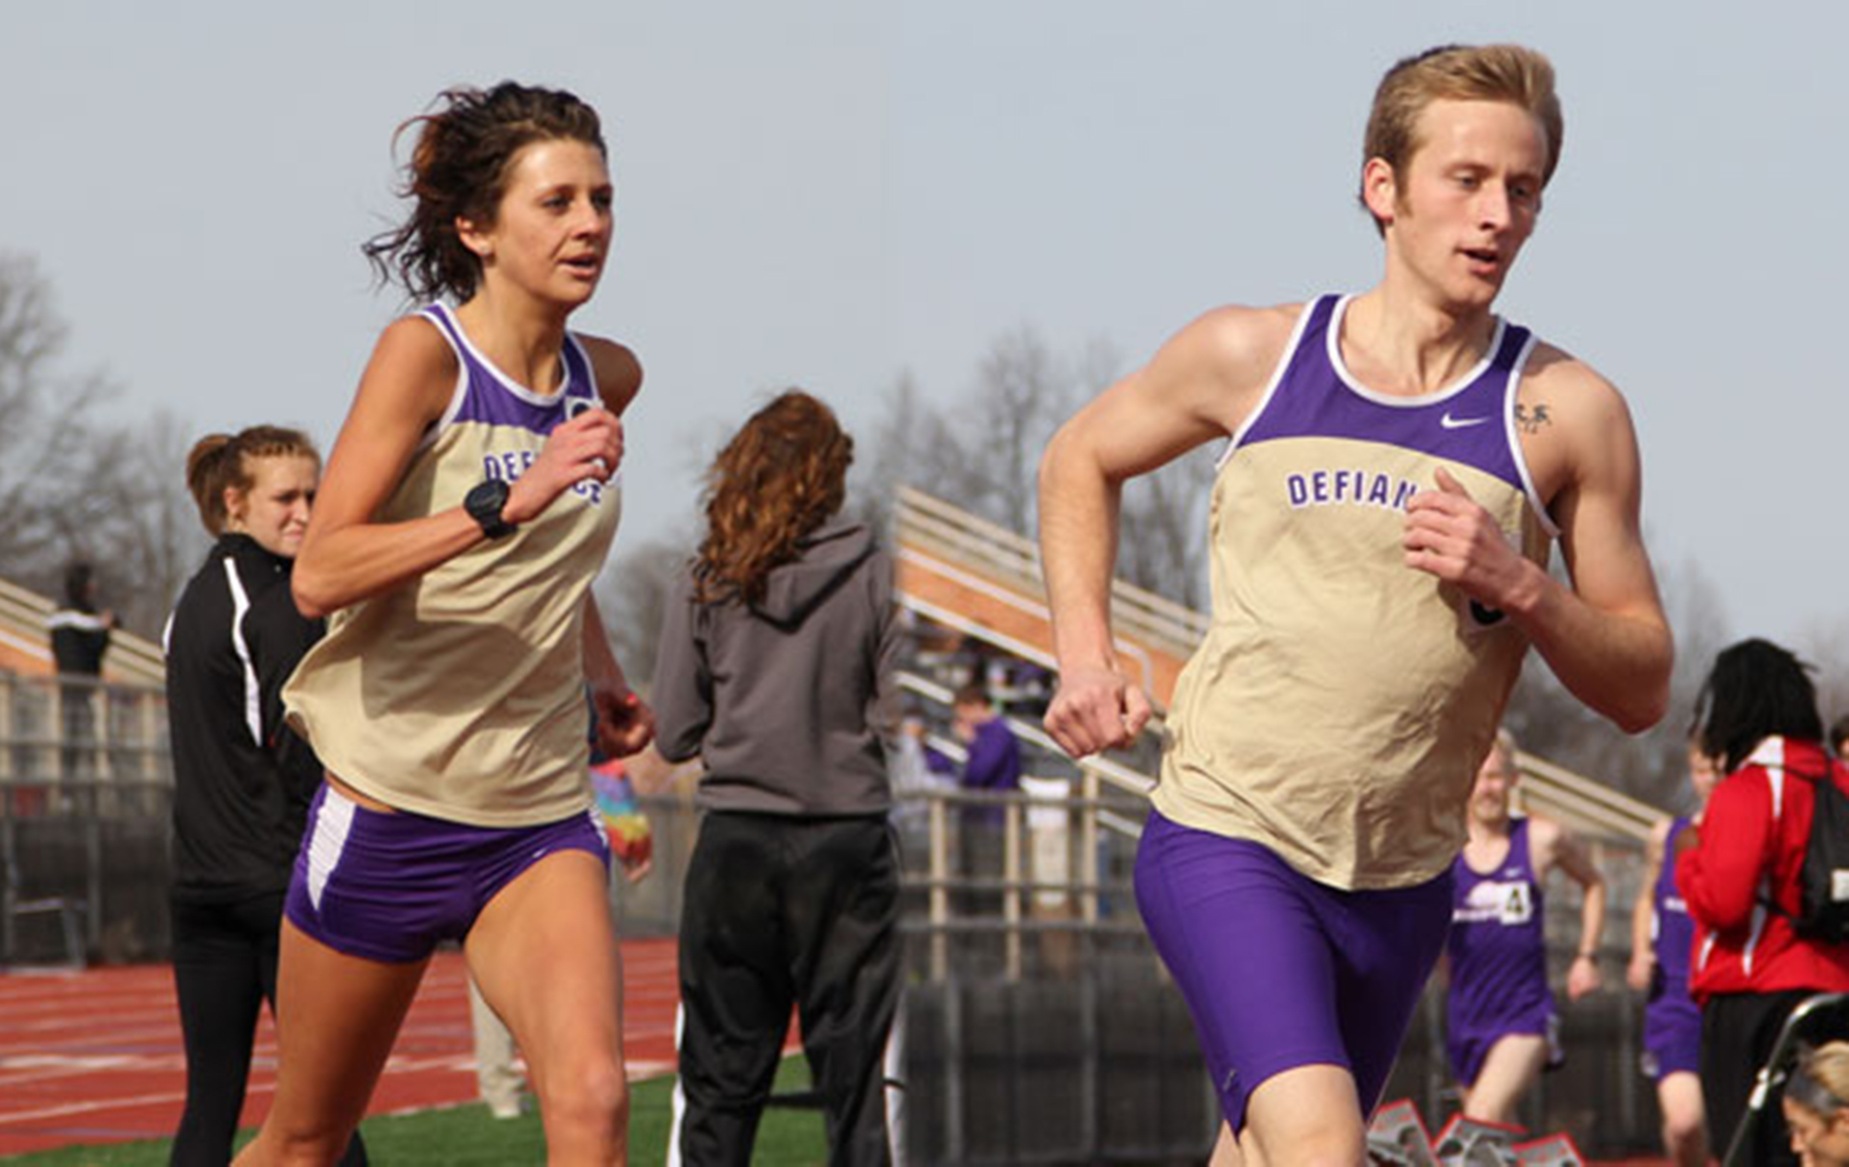 Miller and Hilton finish strong at Dr. Keeler Invitational